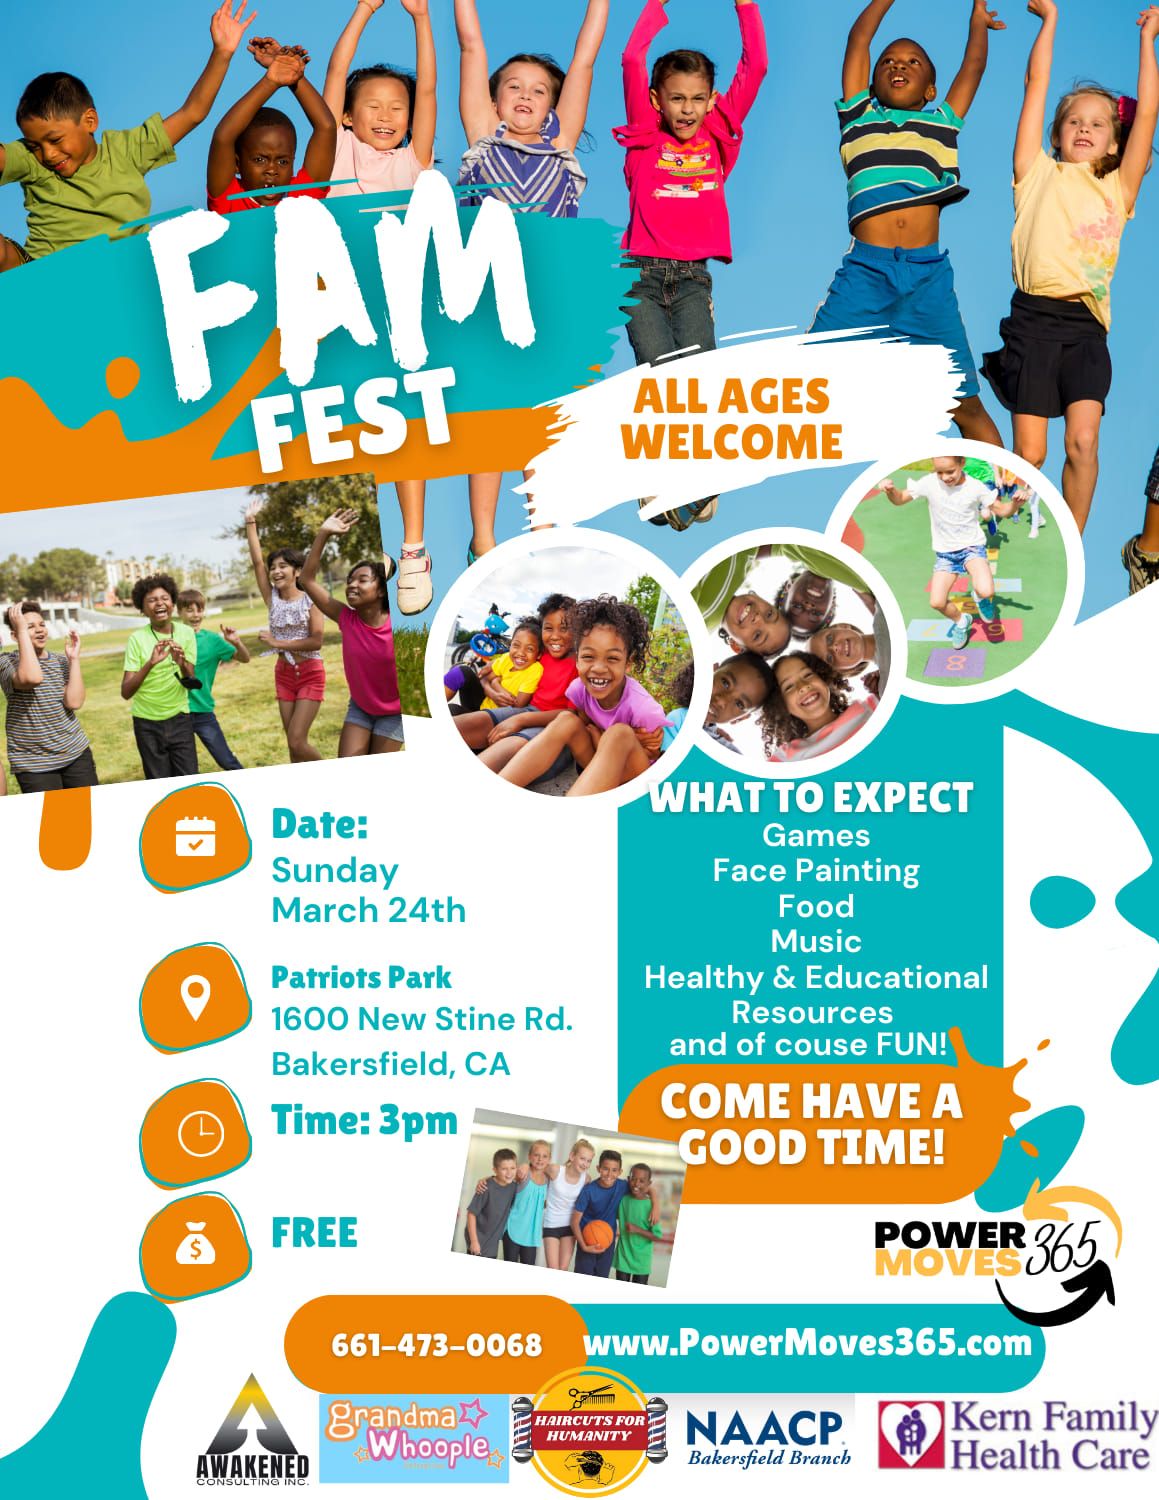 Fam-Fest: Free Event for the Family